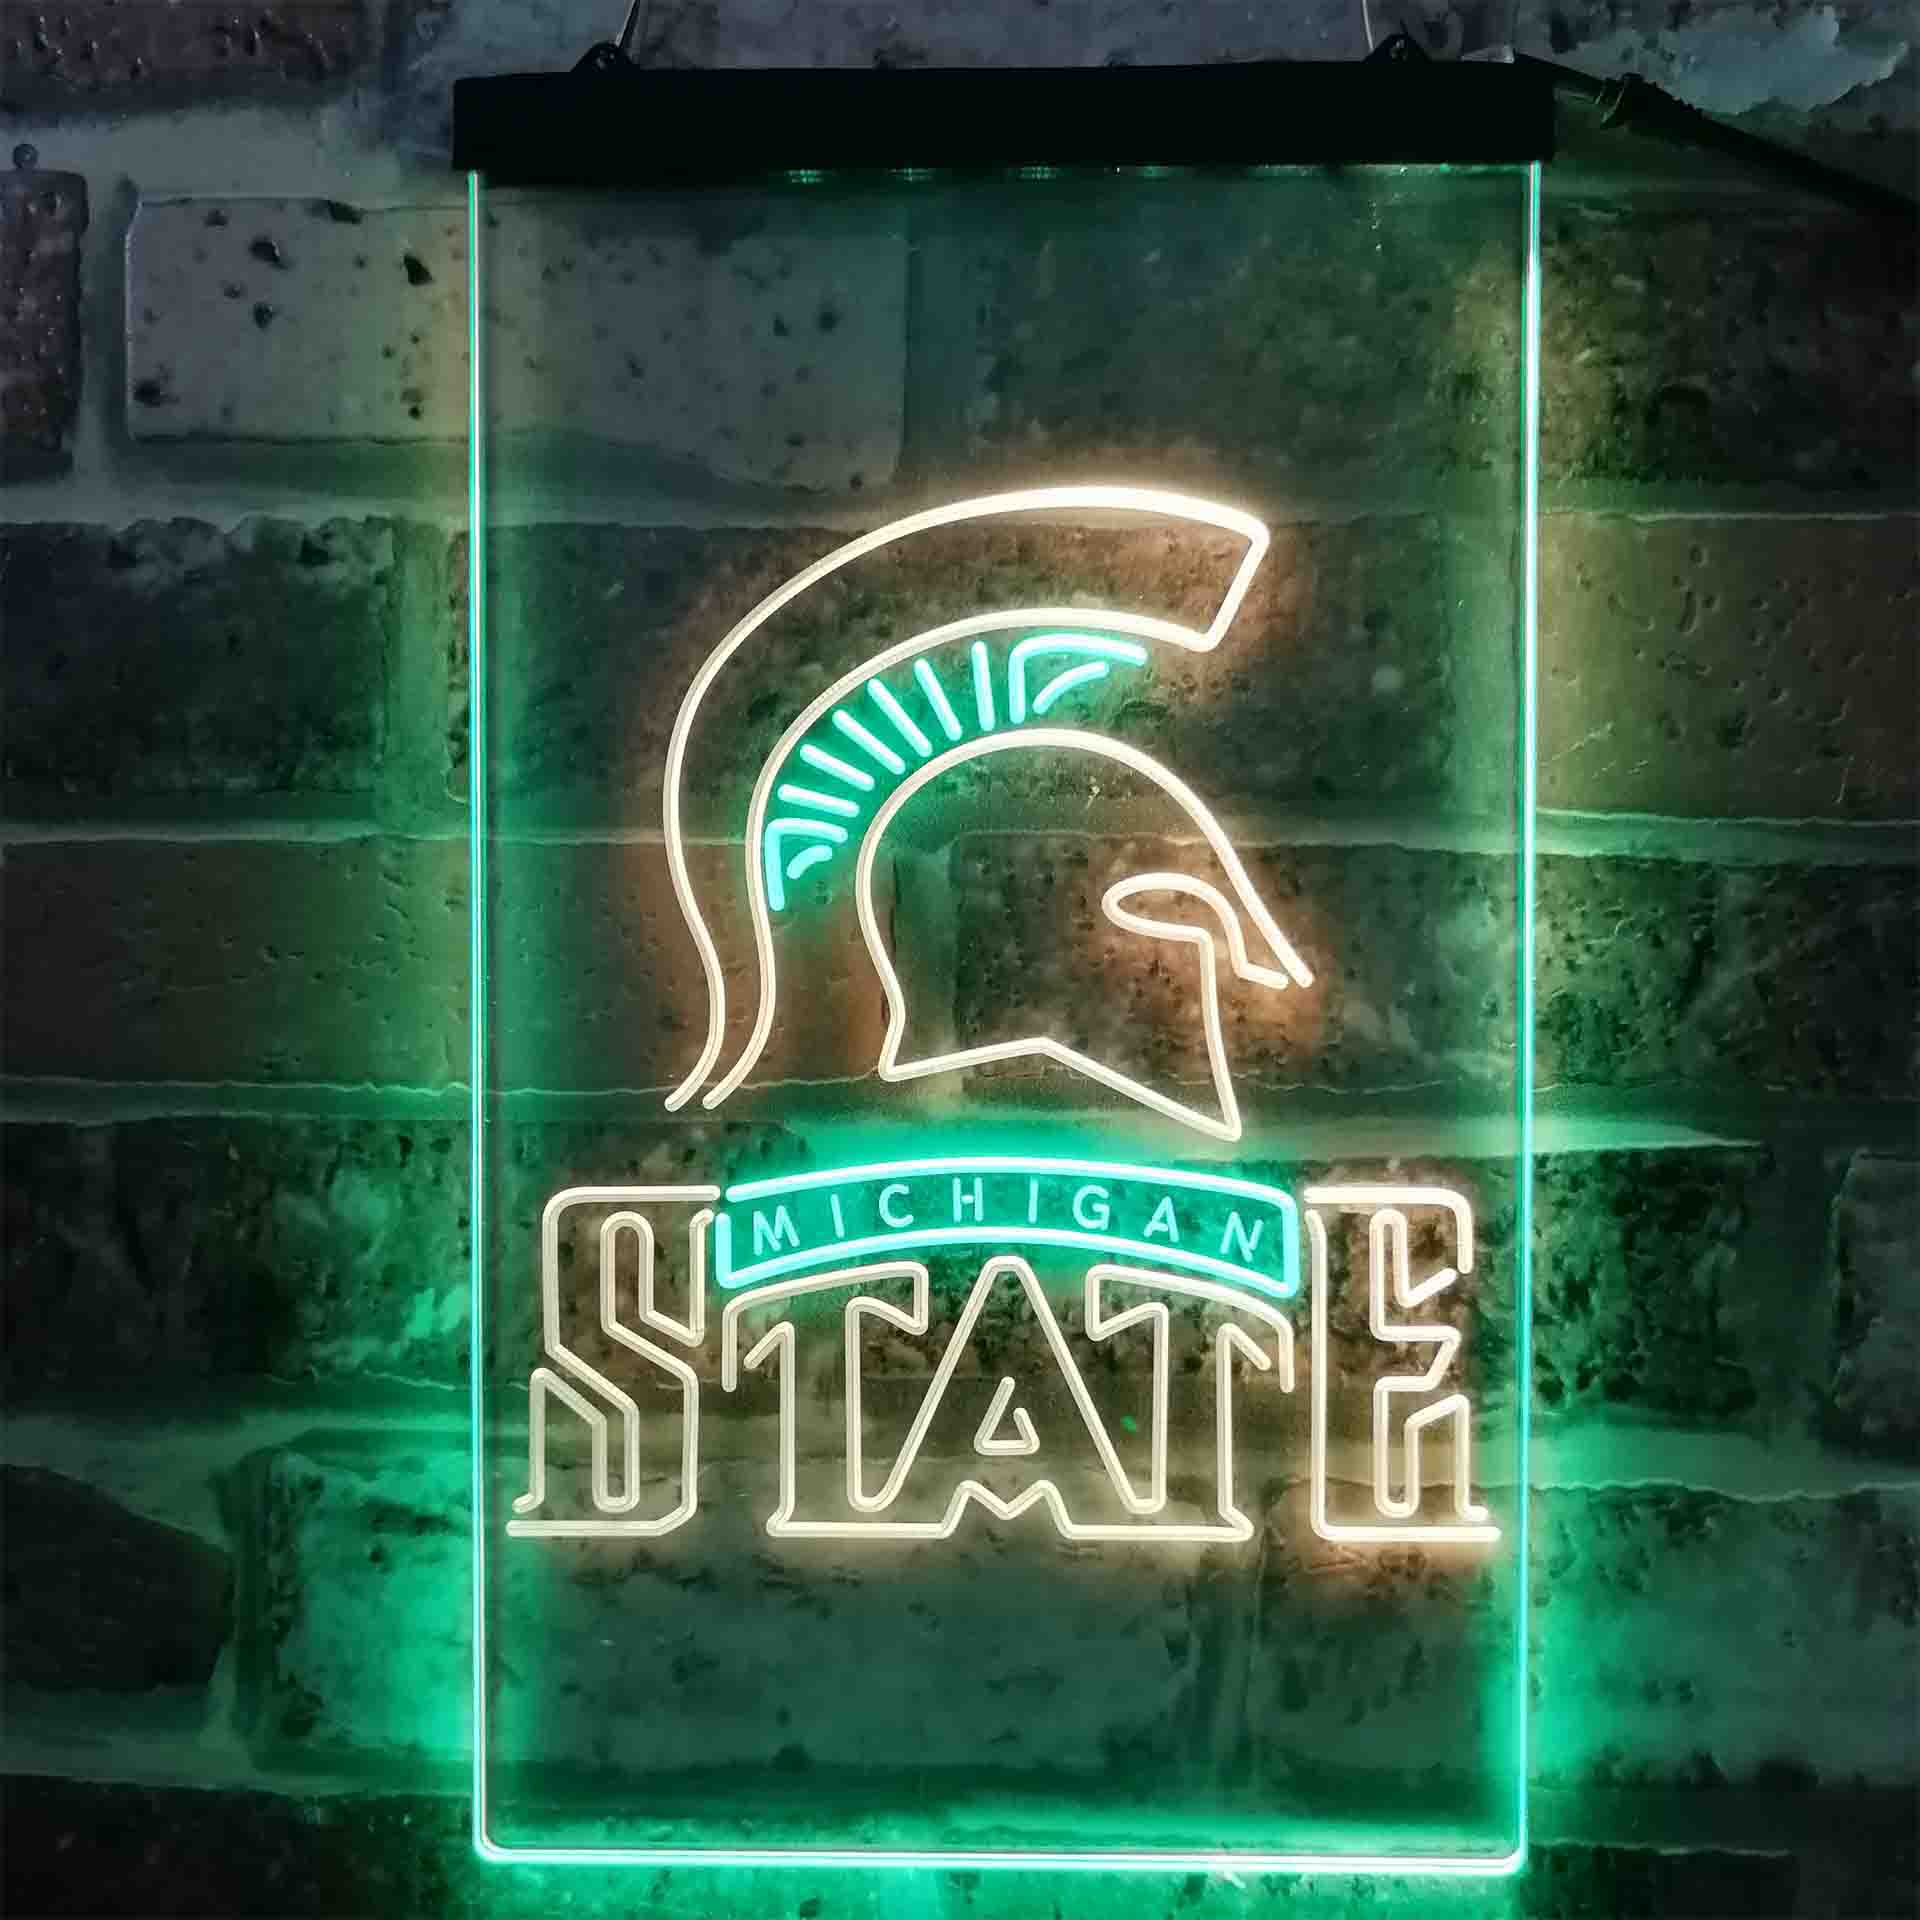 Michigan State Spartans Logo Neon LED Sign